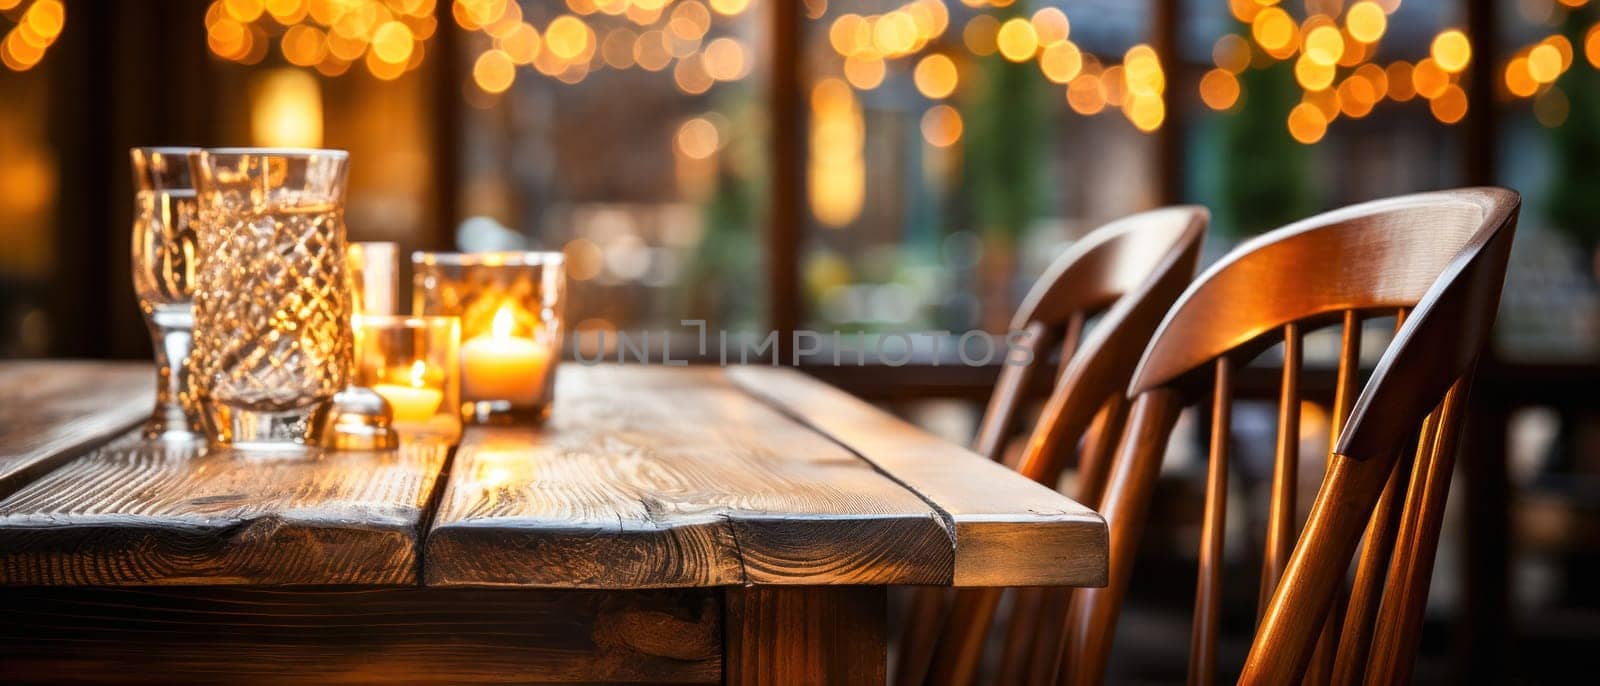 Wooden table on garland background with festive lights by Yurich32